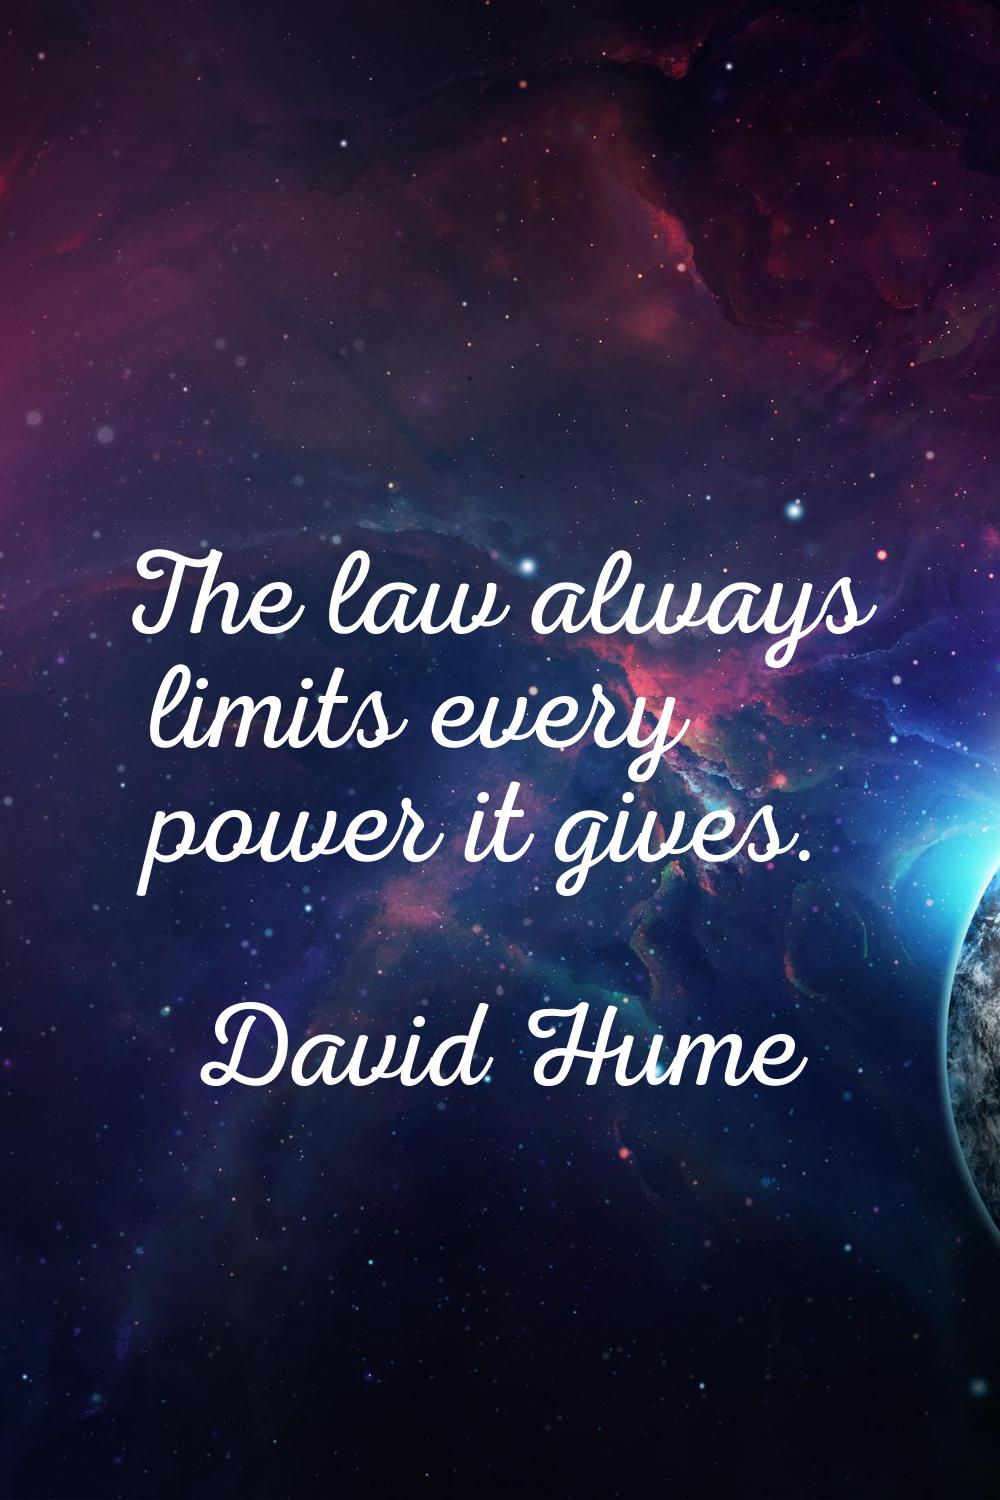 The law always limits every power it gives.